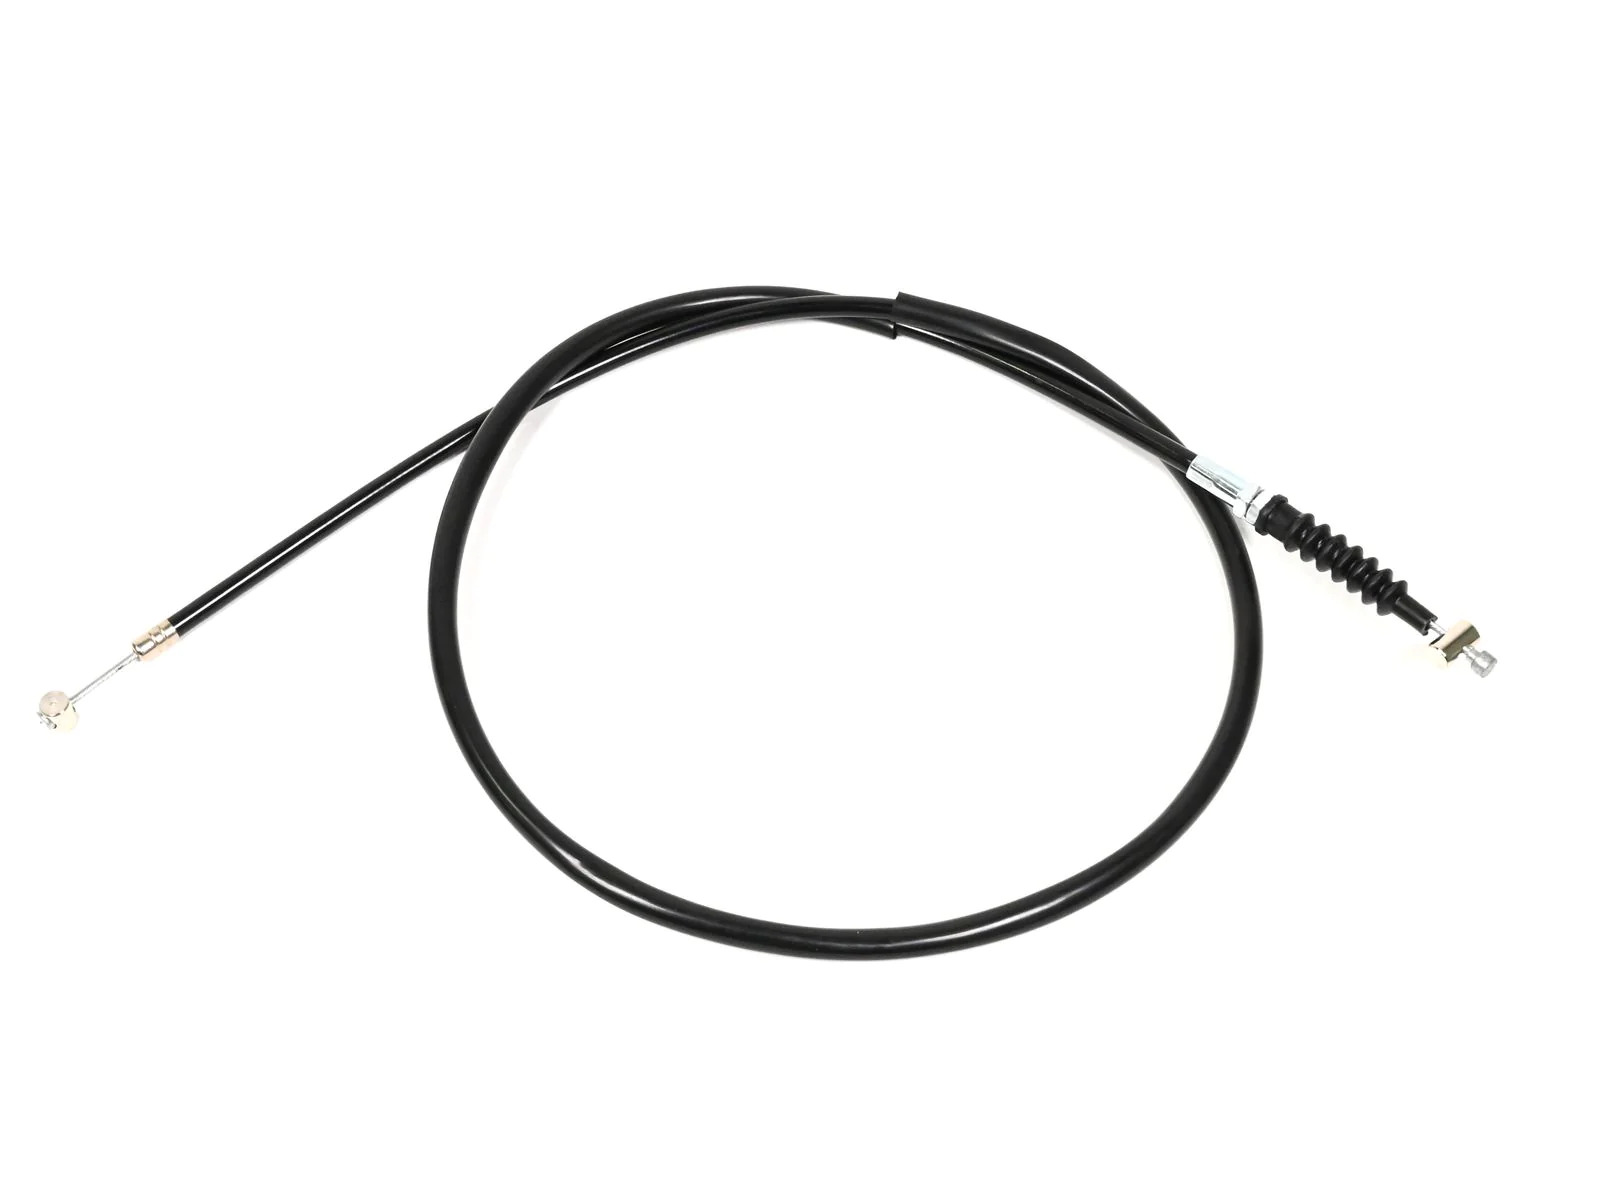 Ozminis KLX110L +7" Extended Front Brake Cable